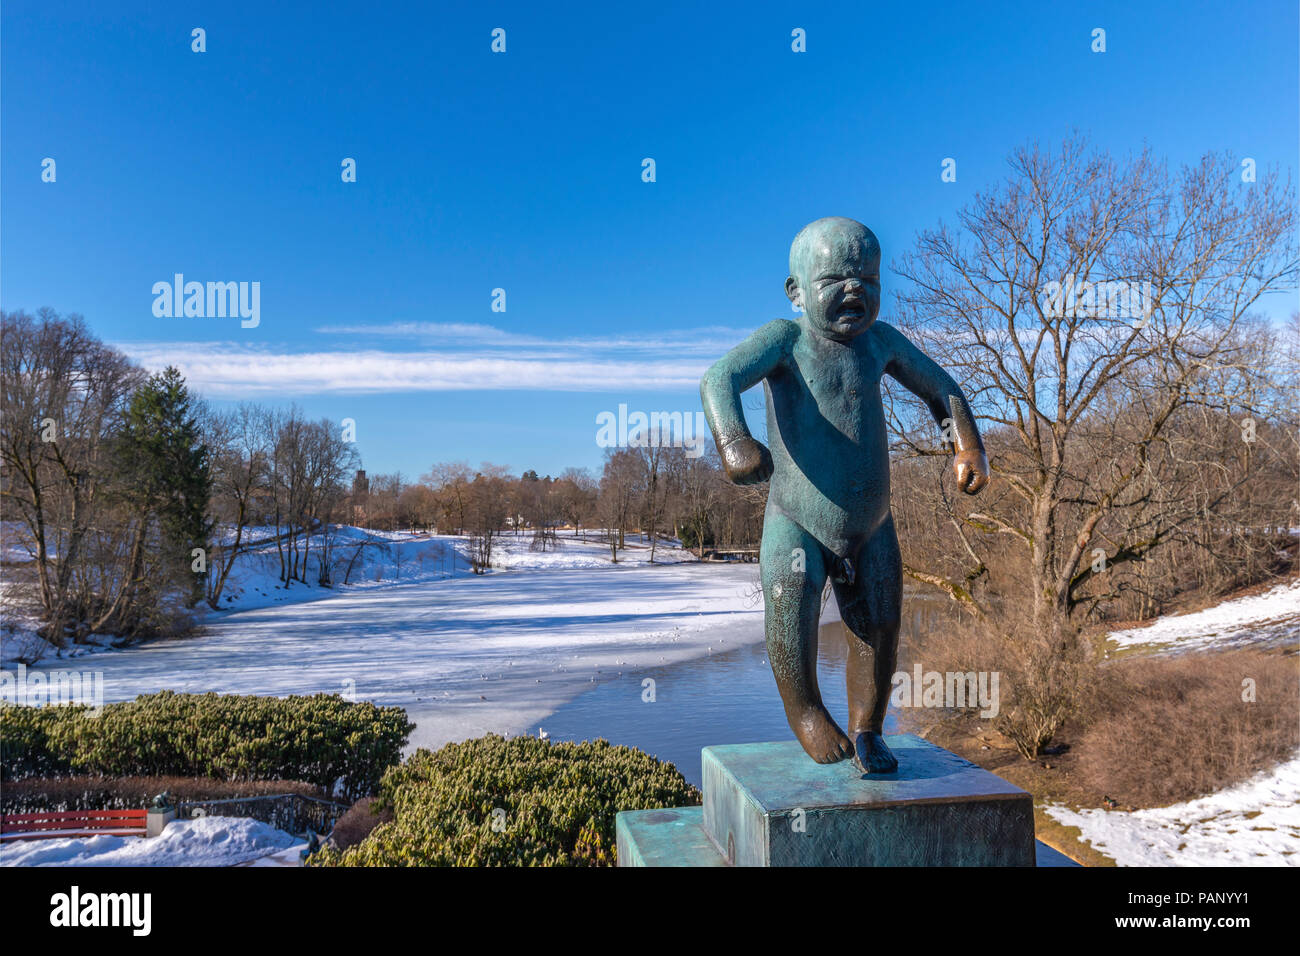 OSLO, NORWAY - APRIL 6, 2018: Oslo city skyline at famous Angry Boy Statue in Vigeland Sculpture Park, Oslo, Norway Stock Photo